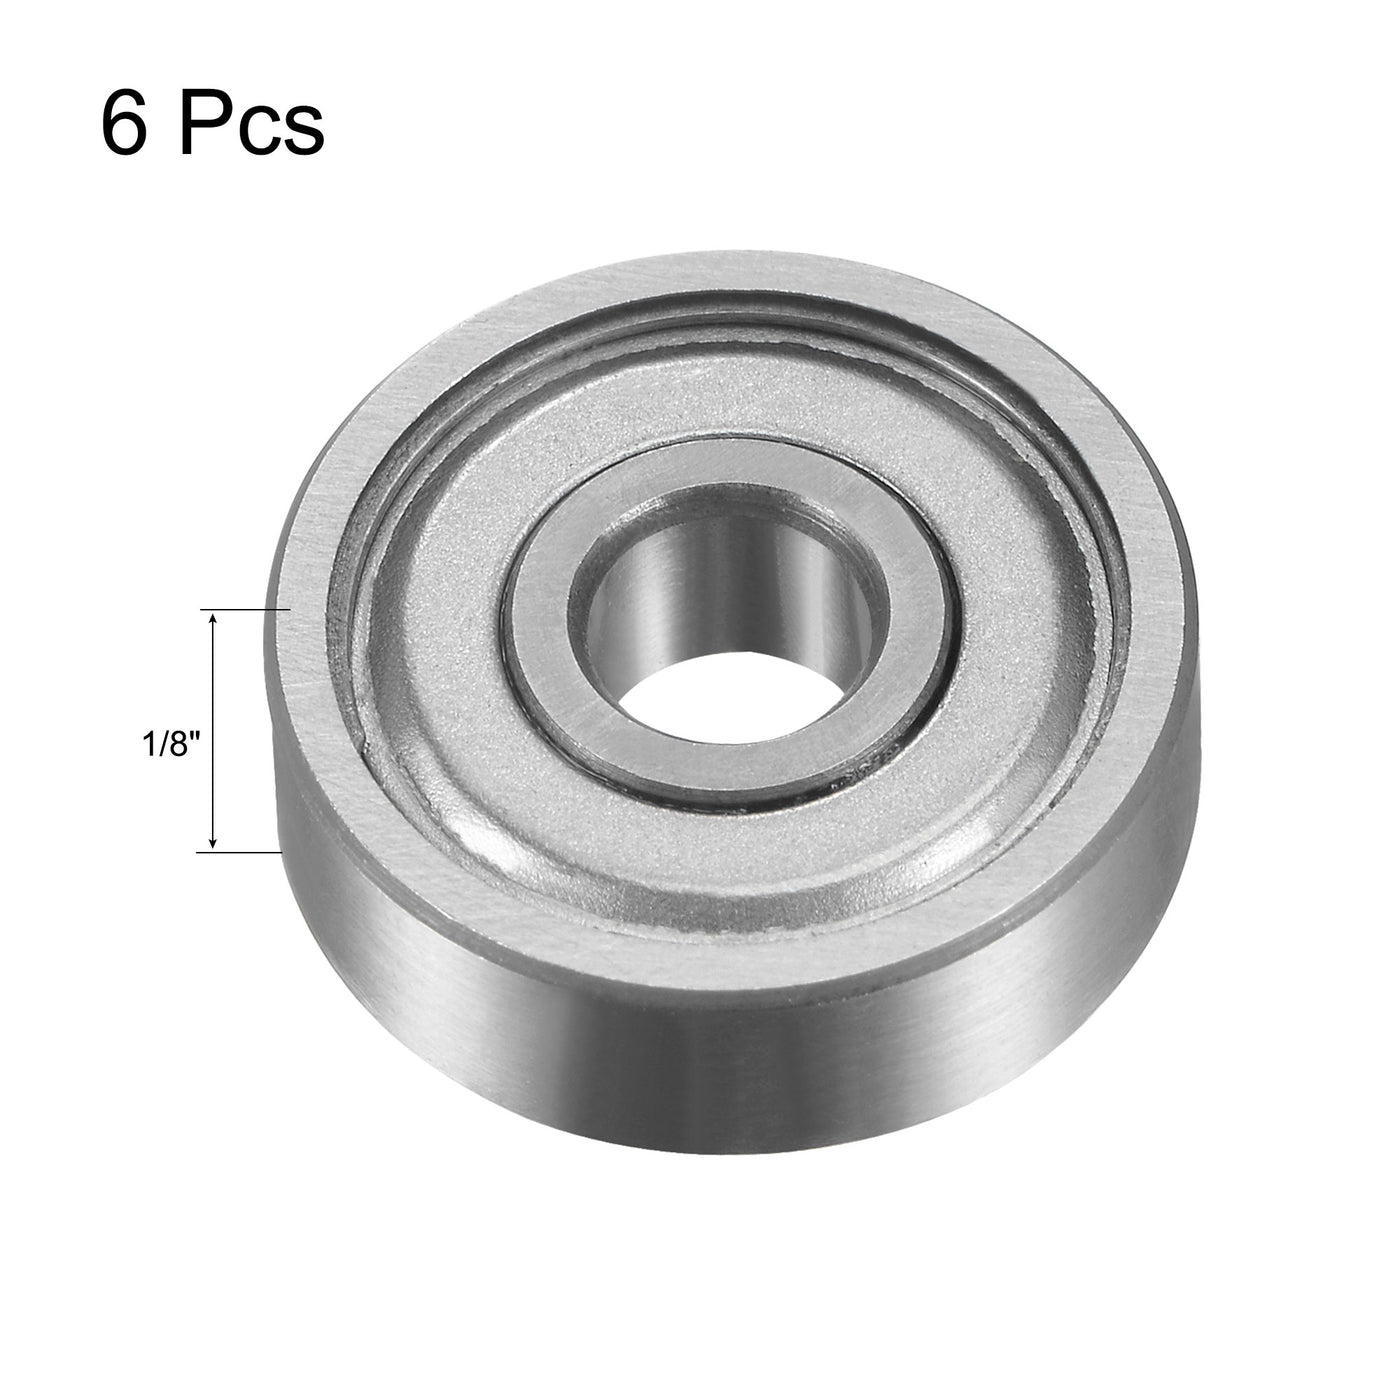 Uxcell Uxcell 6Pcs Bearing Accessory Kit 3/16" I.D. 1/2" OD Top Mounted Bearings for Router Bit (#5-40 x 1/4" Screws)